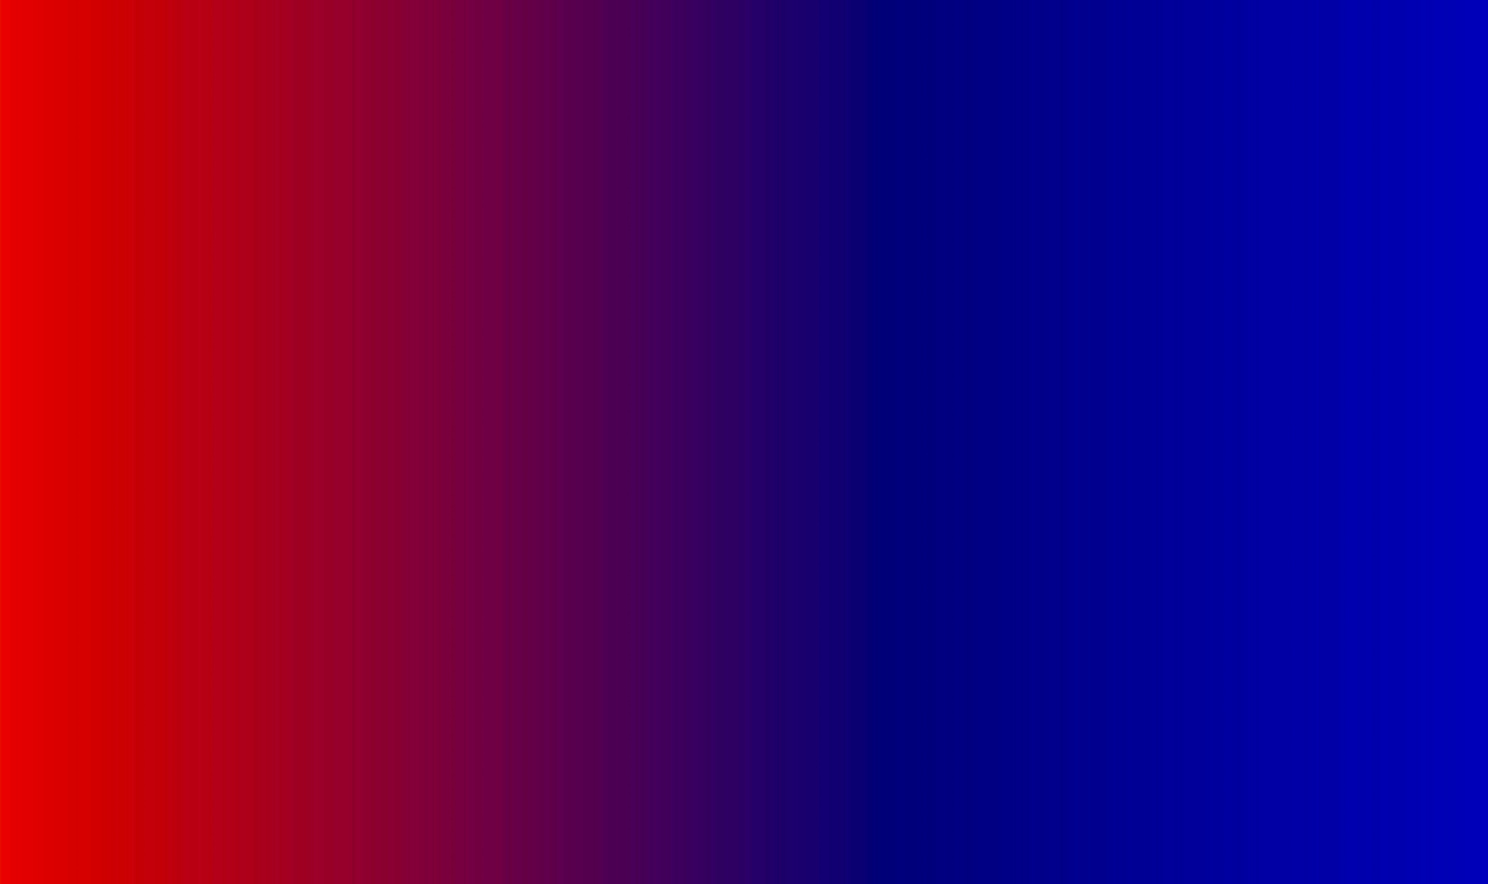 Colorful gradient blend of red and blue background